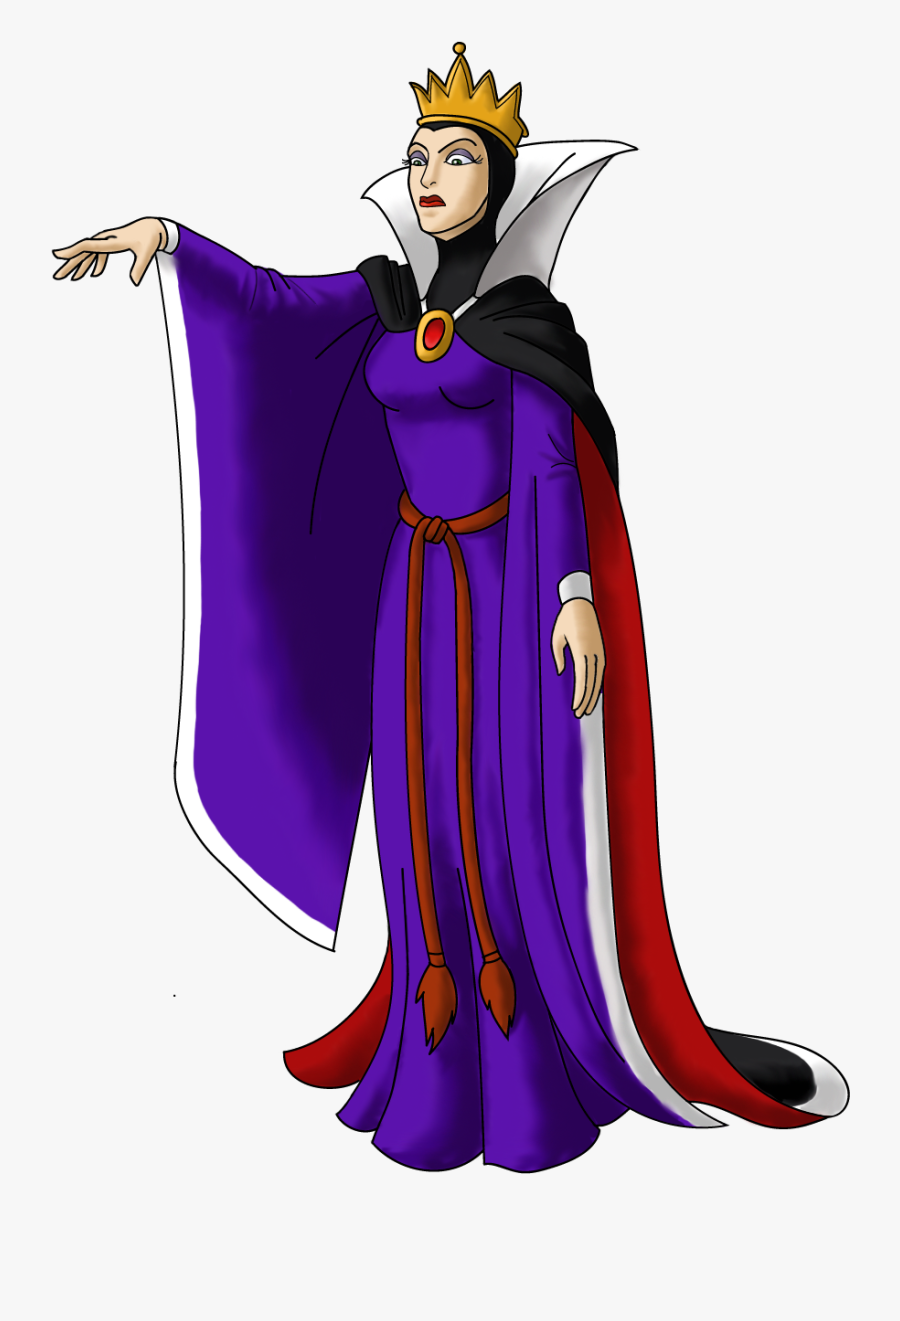 Queen Clipart Snow White Witch - Queen In Snow White Cartoon, Transparent Clipart